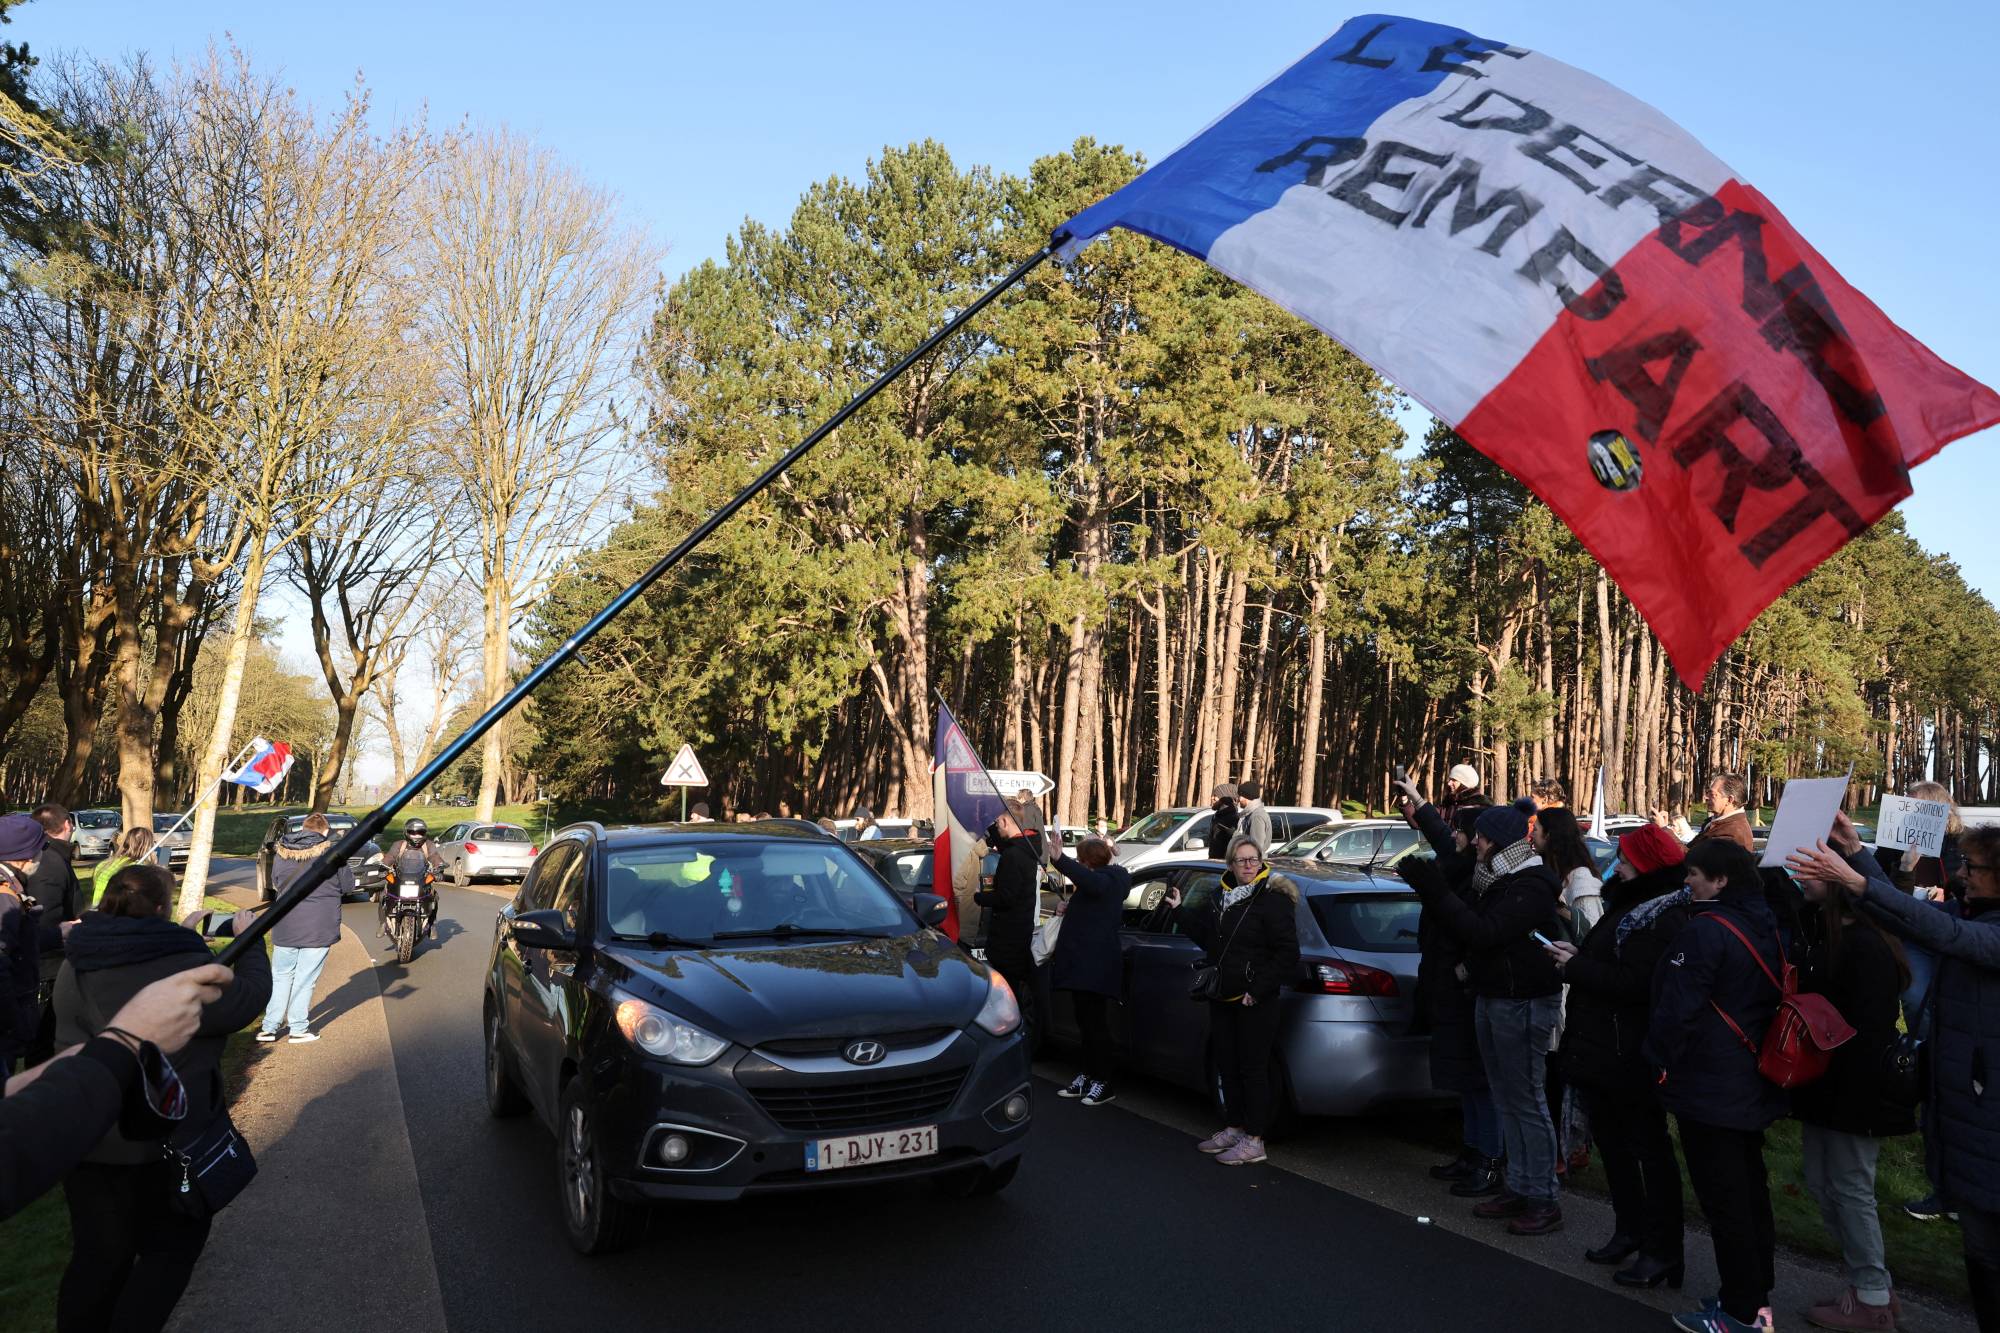 Protesters against COVID-19 restrictions near the Canadian National Memorial in Vimy, northern France, on Friday. | REUTERS